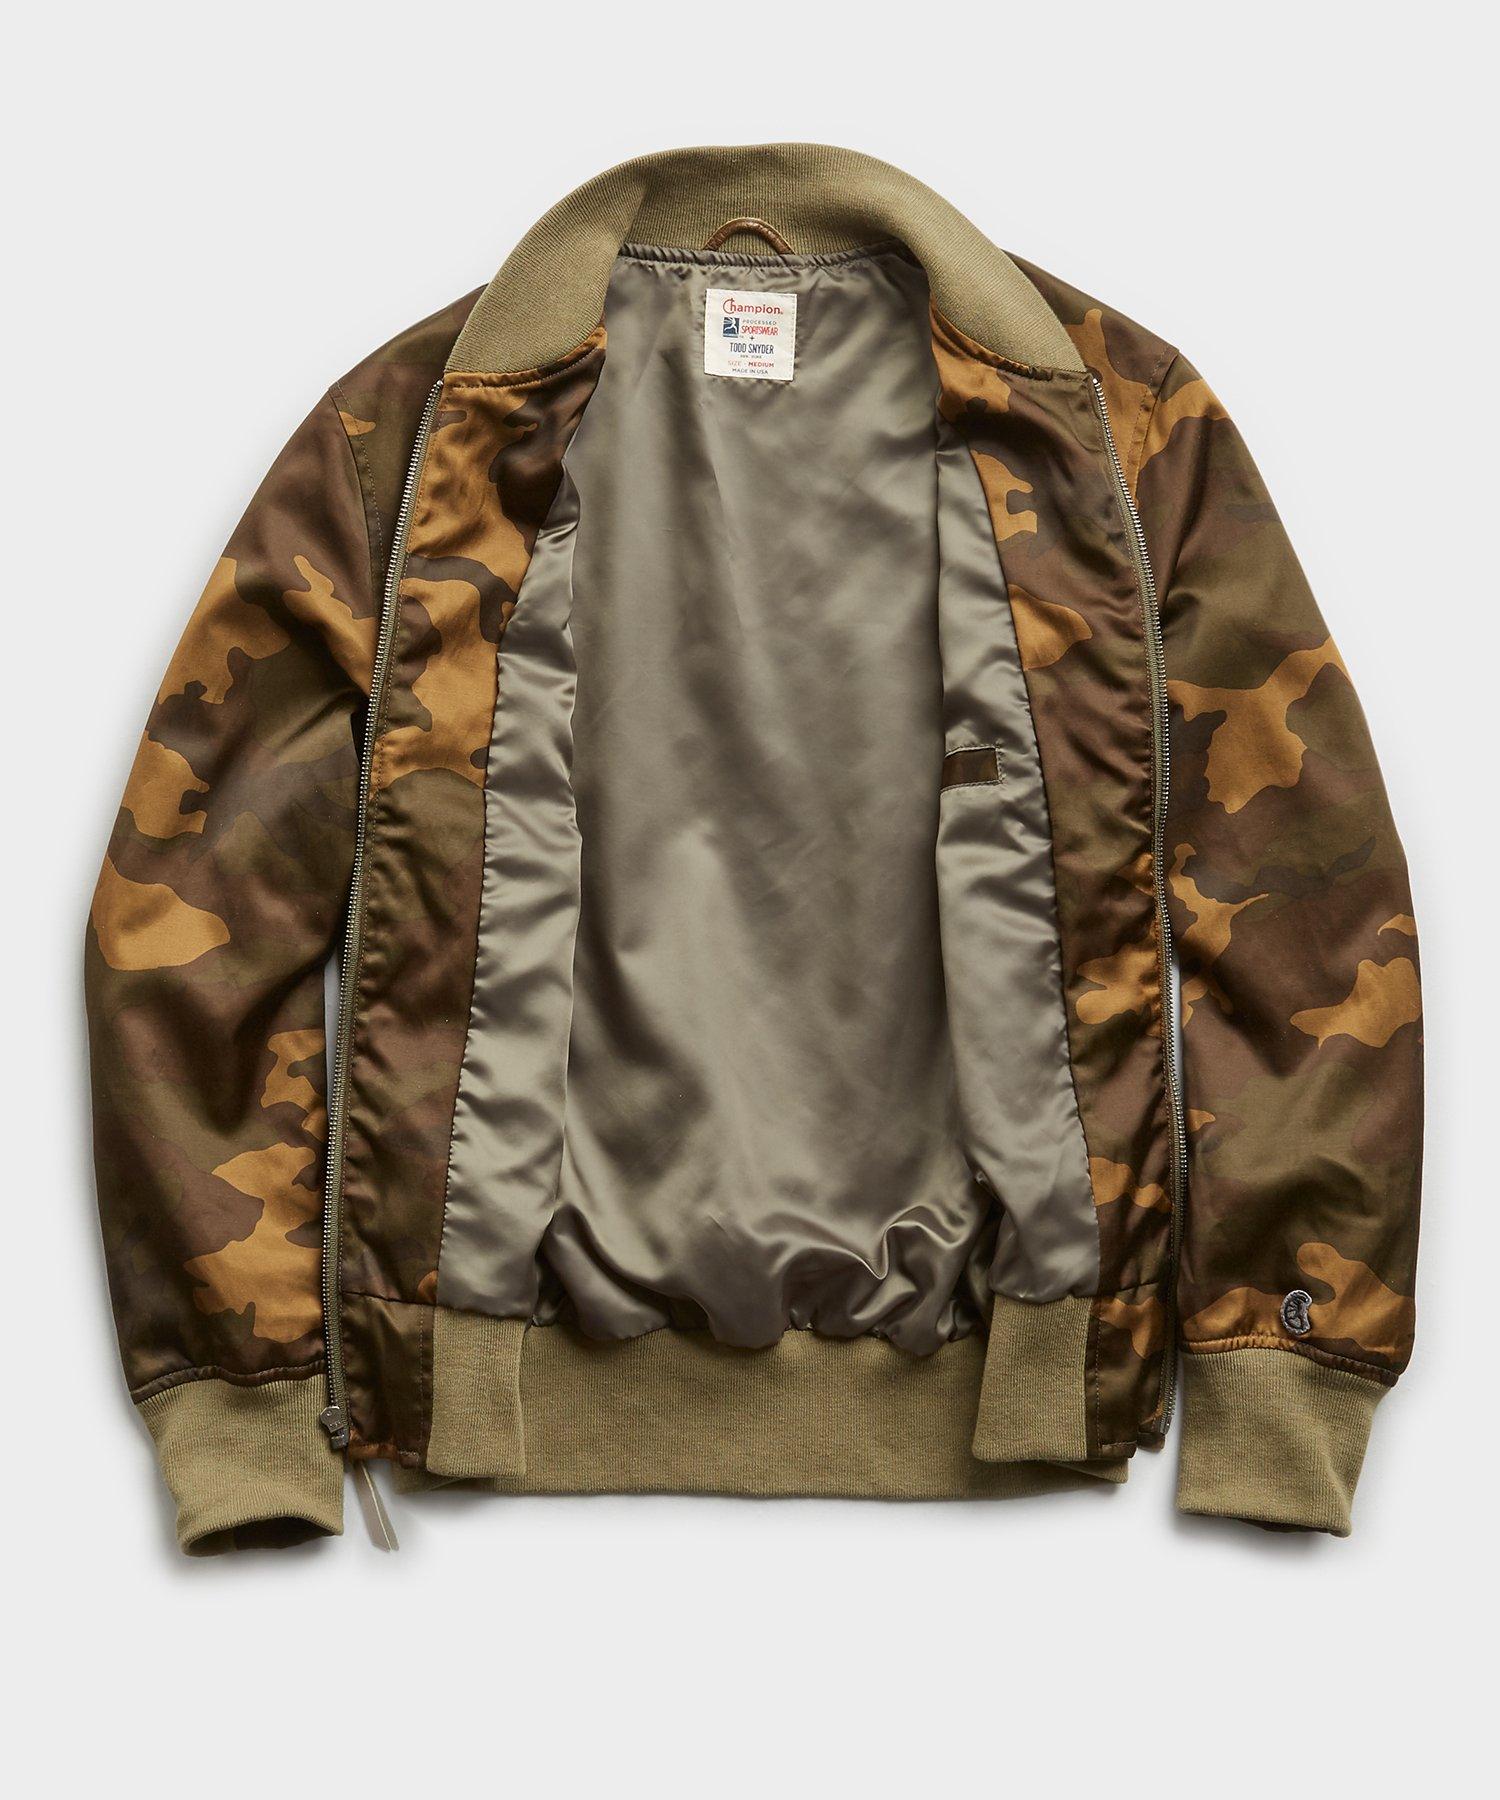 Todd Synder X Champion Japanese Satin Camo Bomber for Men - Lyst